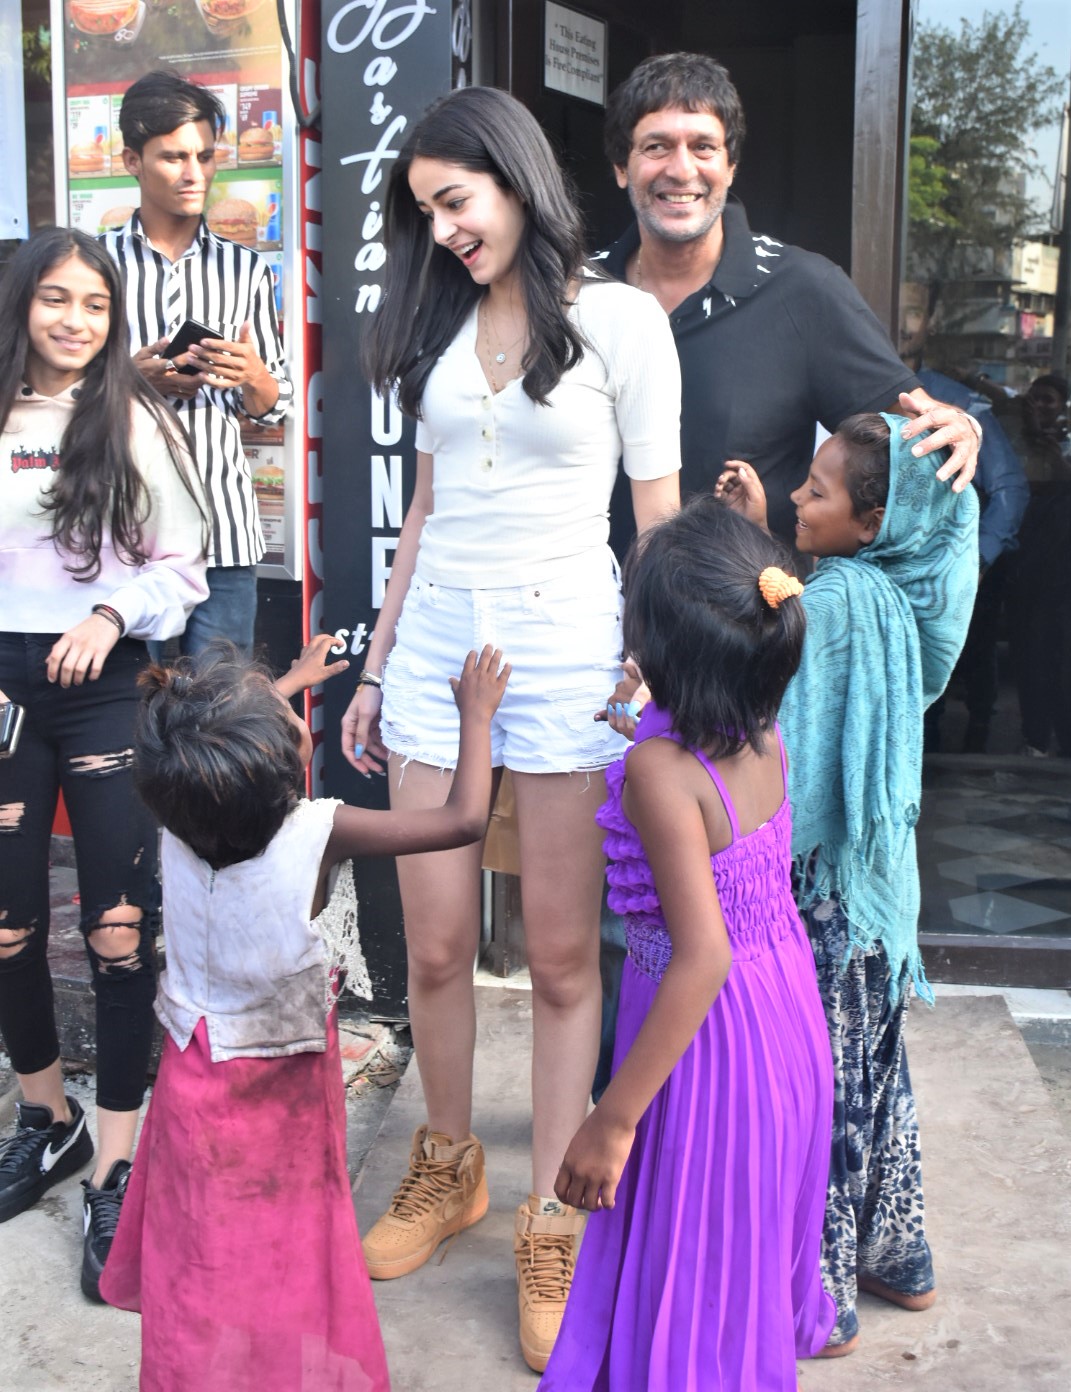 Ananya Panday Has A Family Day Out With Her Father And Sister Masala Com She additionally has a sister. masala